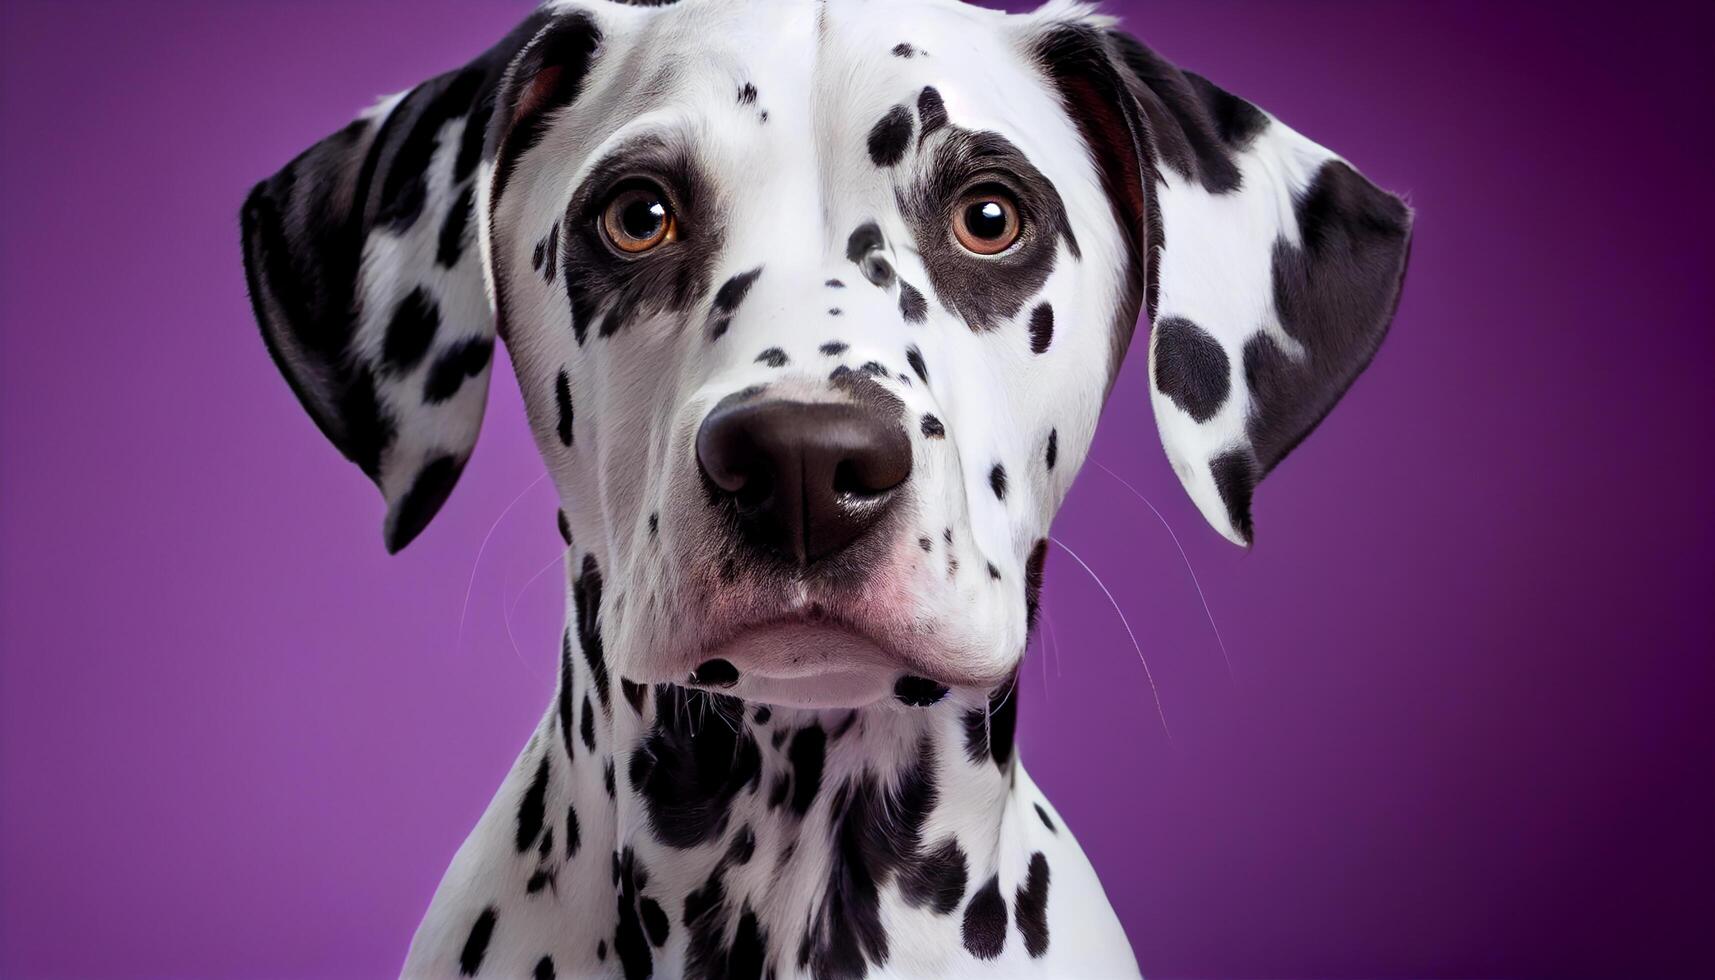 Spotted purebred Dalmatian puppy sitting in studio generated by AI photo